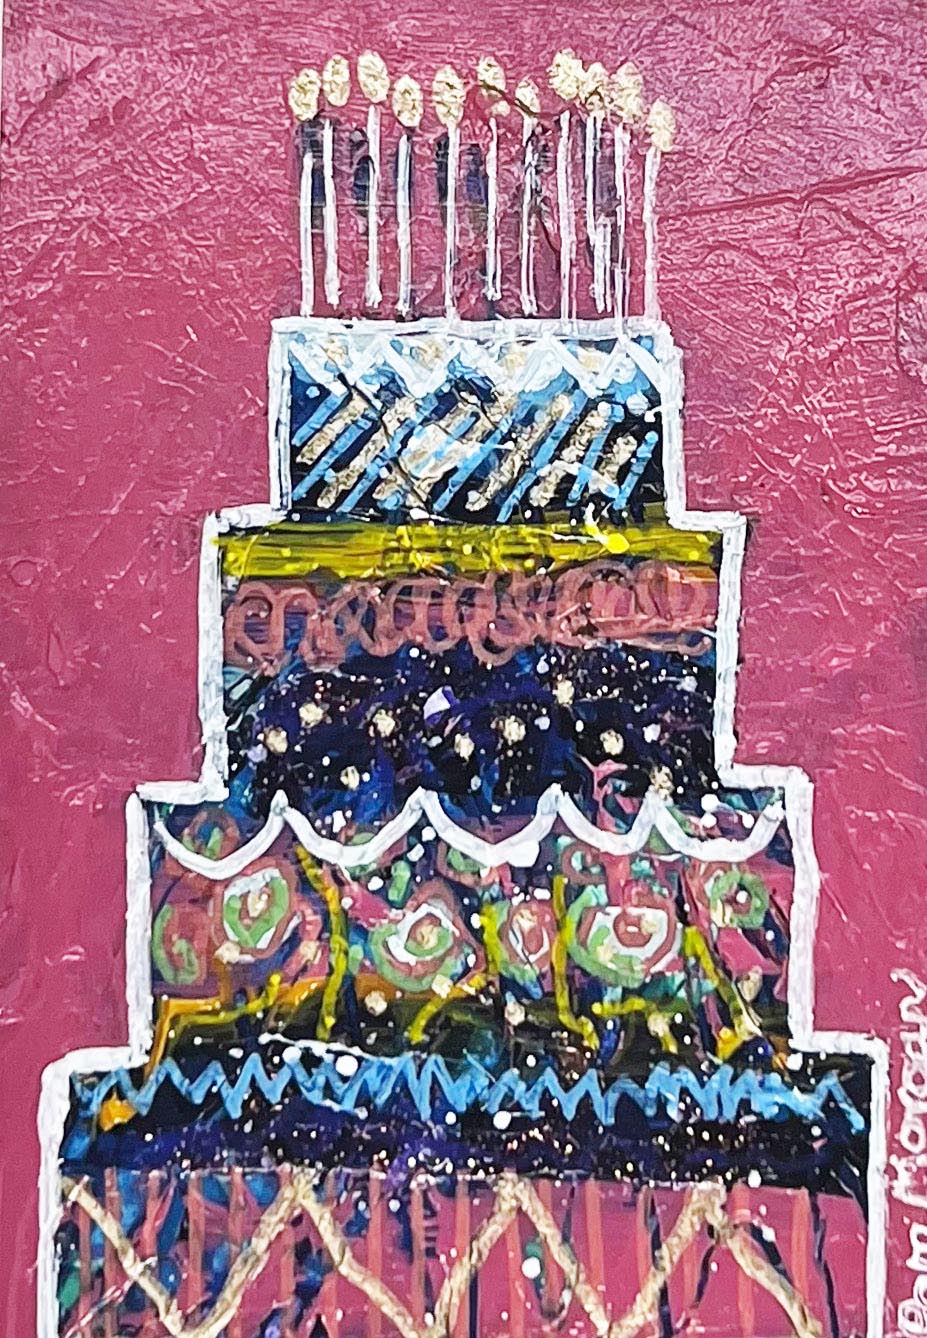 birthday card featuring painting of 4 tiered cake on pink background